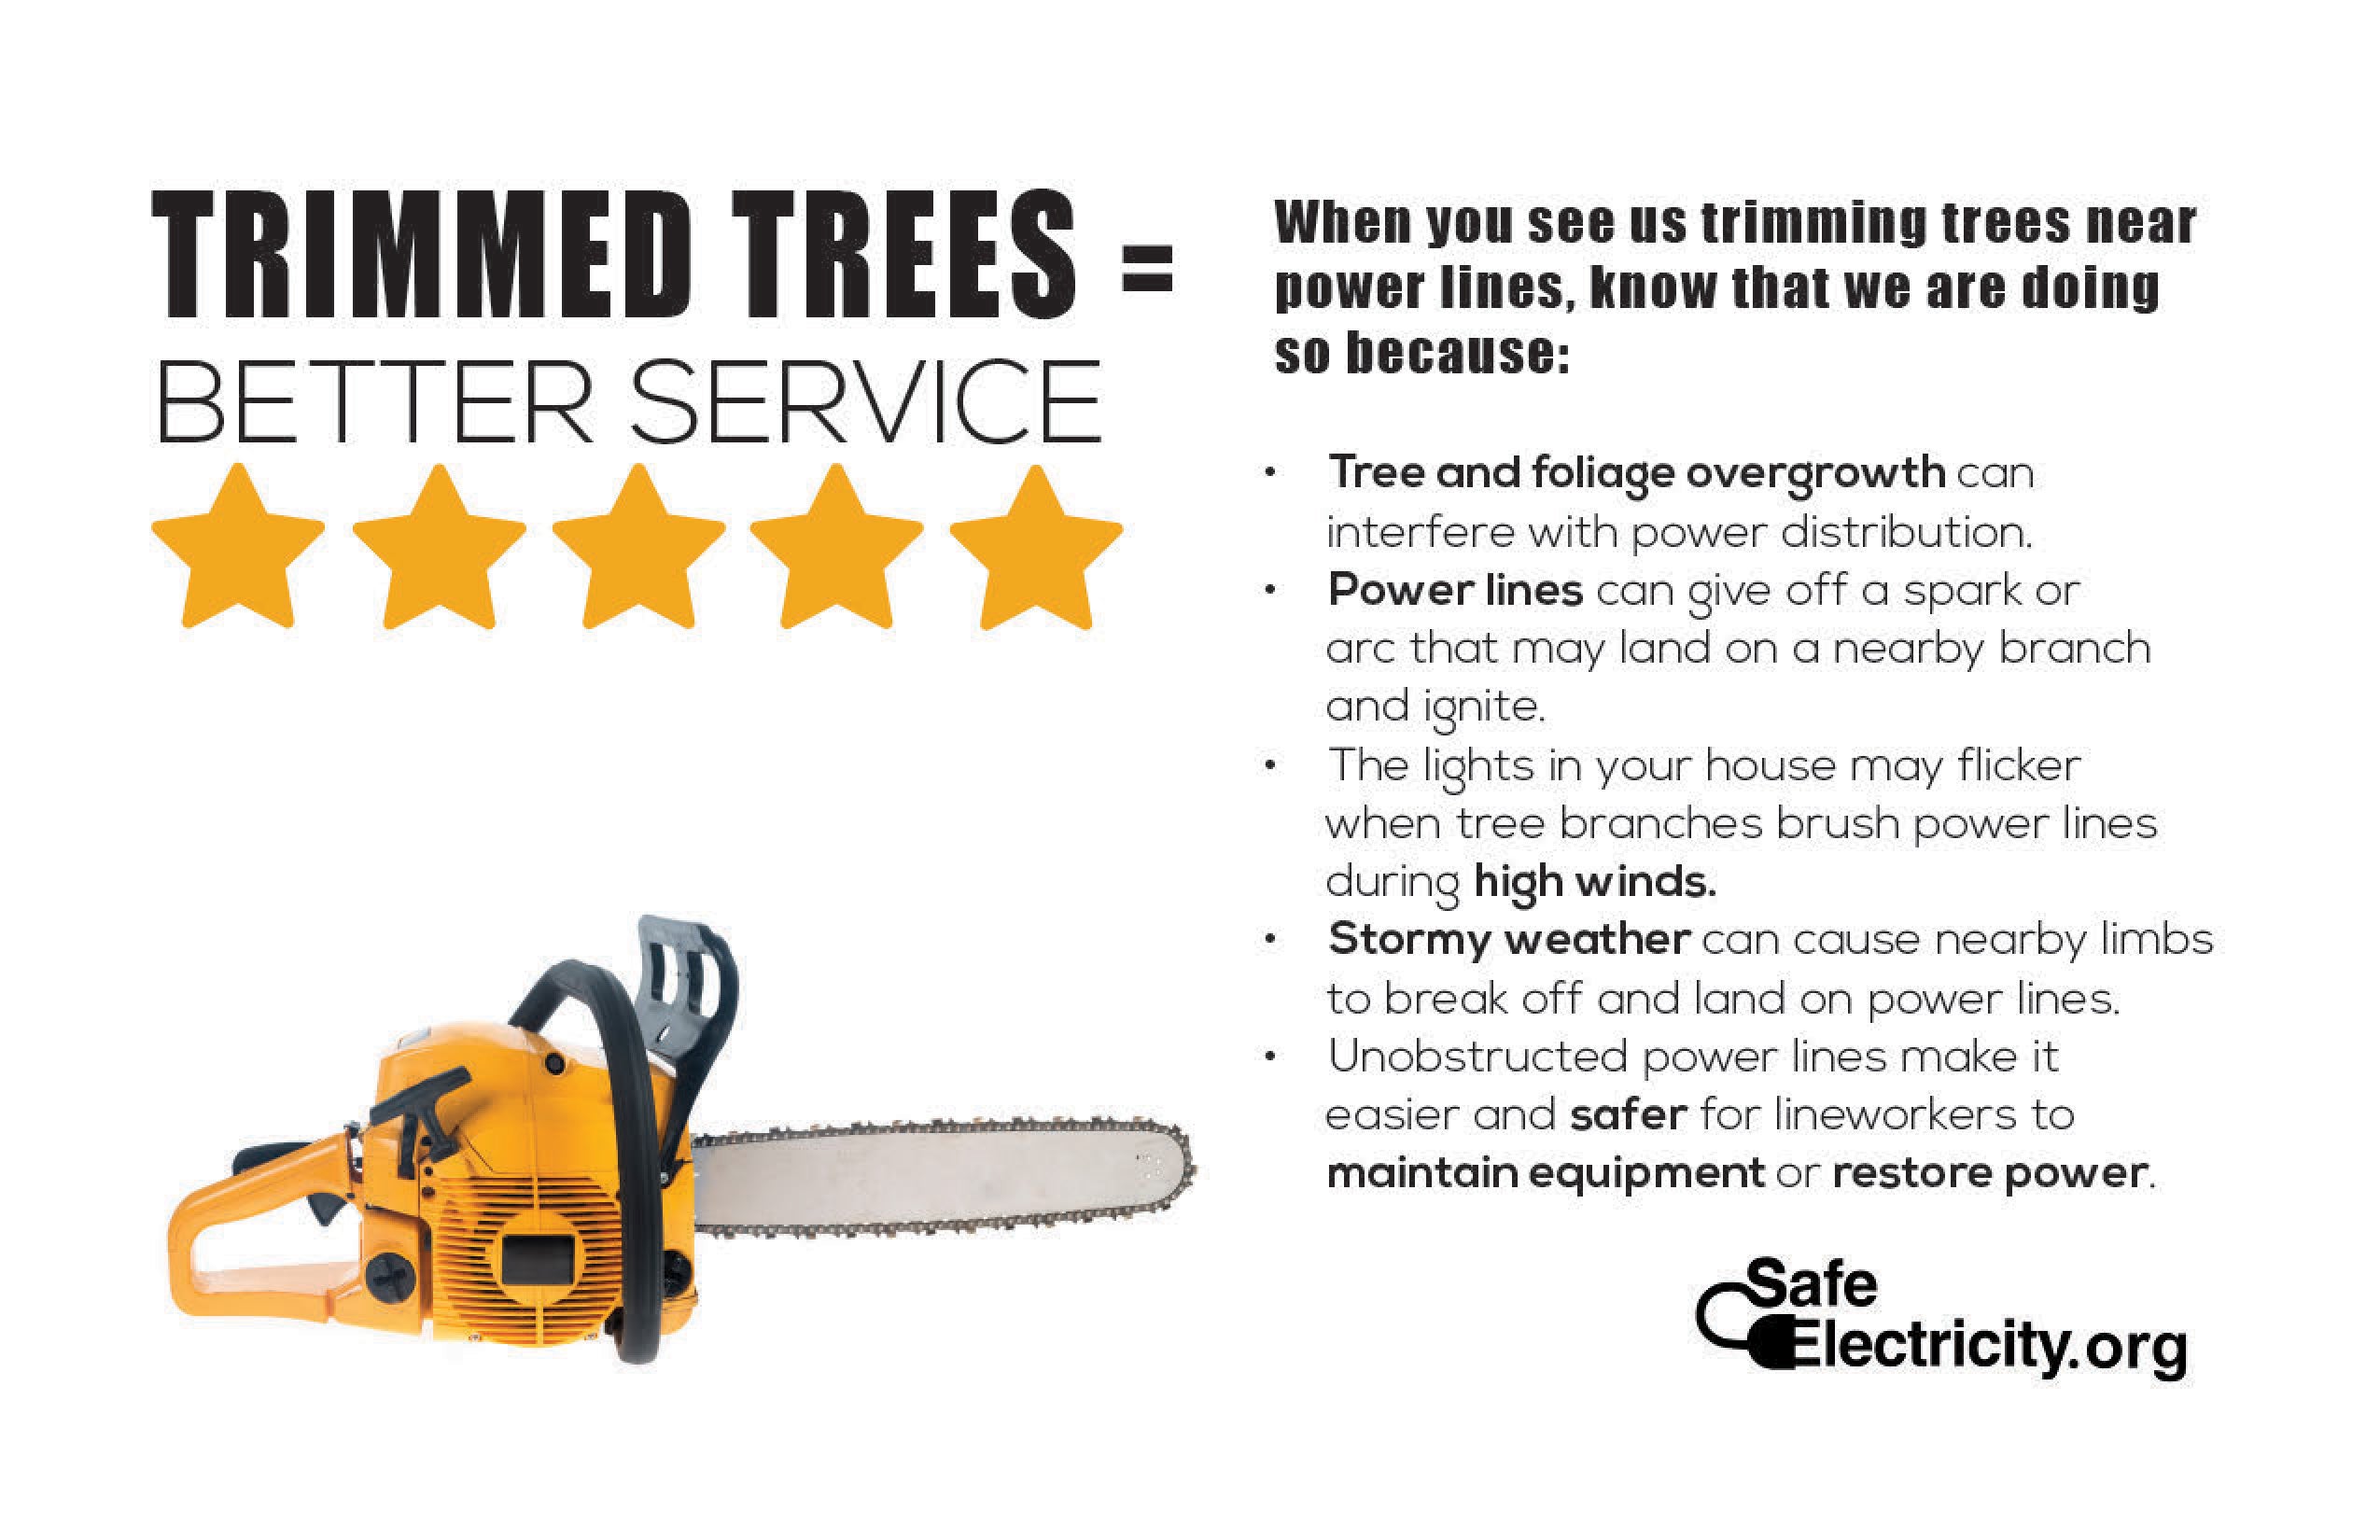 Tree trimming safety tips